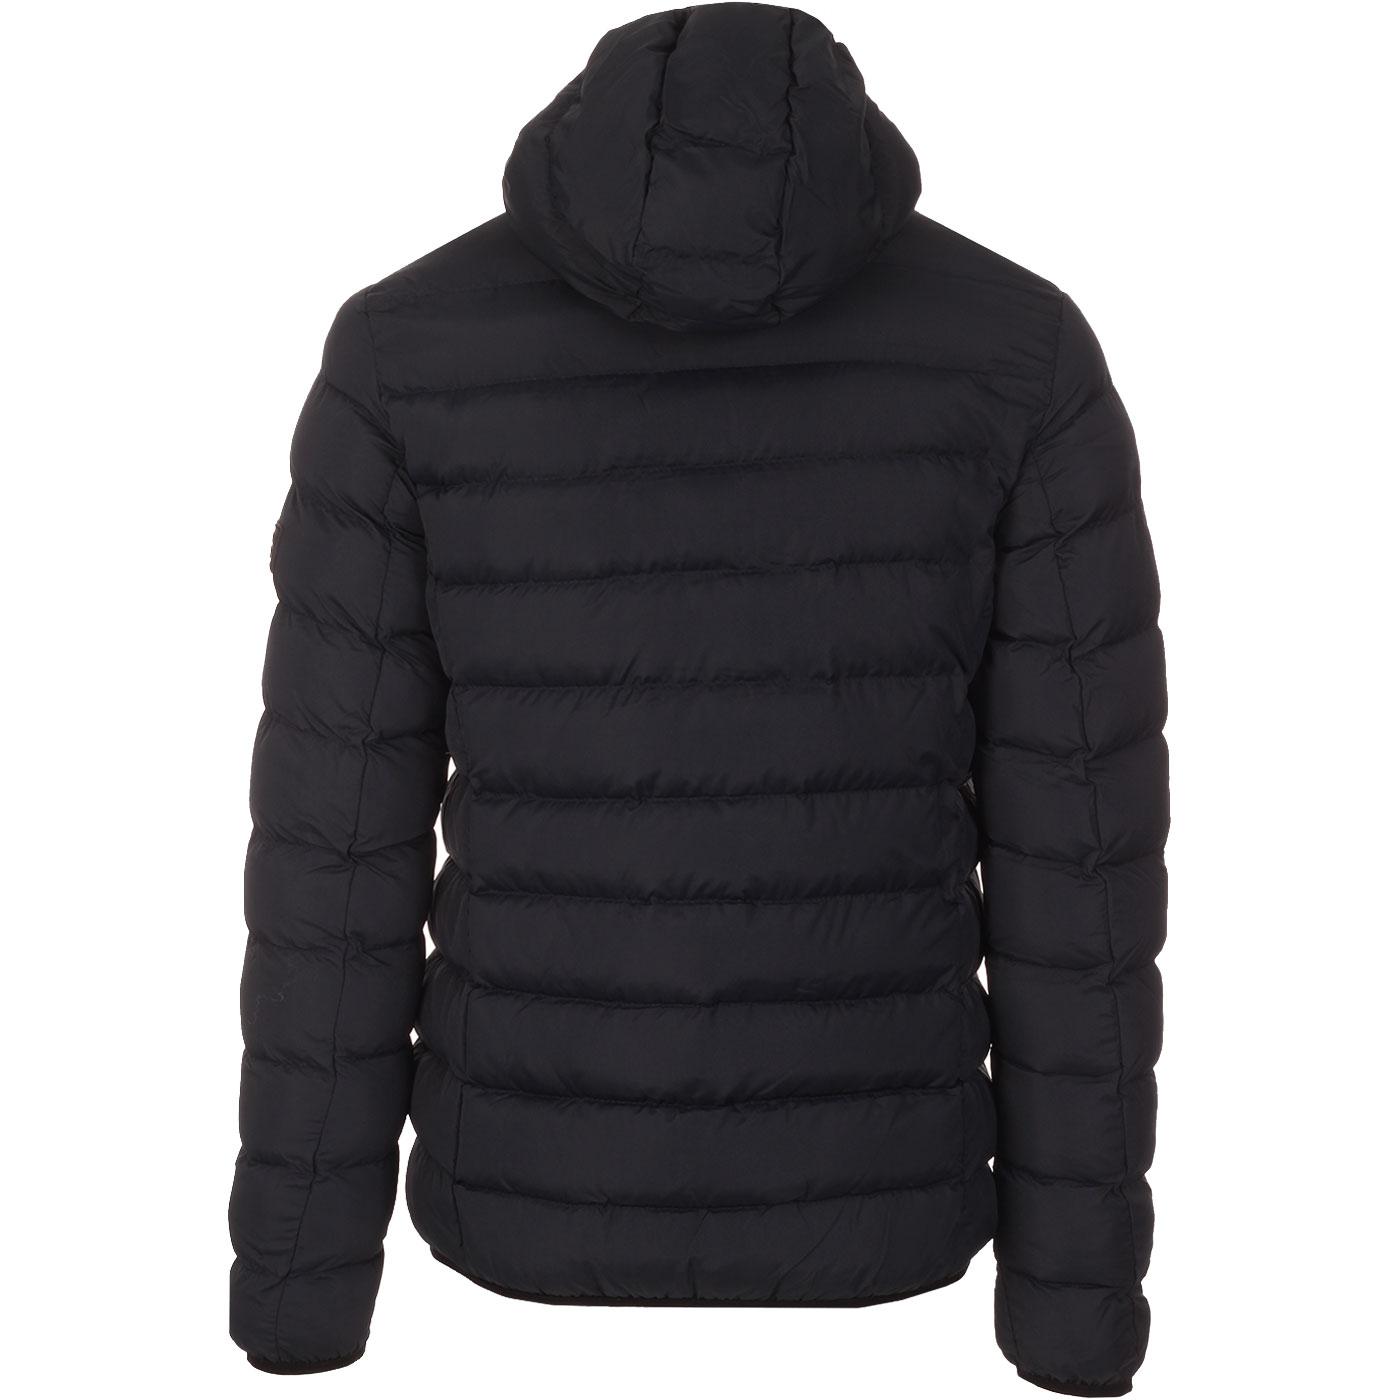 FRENCH CONNECTION Men's Hooded Padded Jacket in Marine